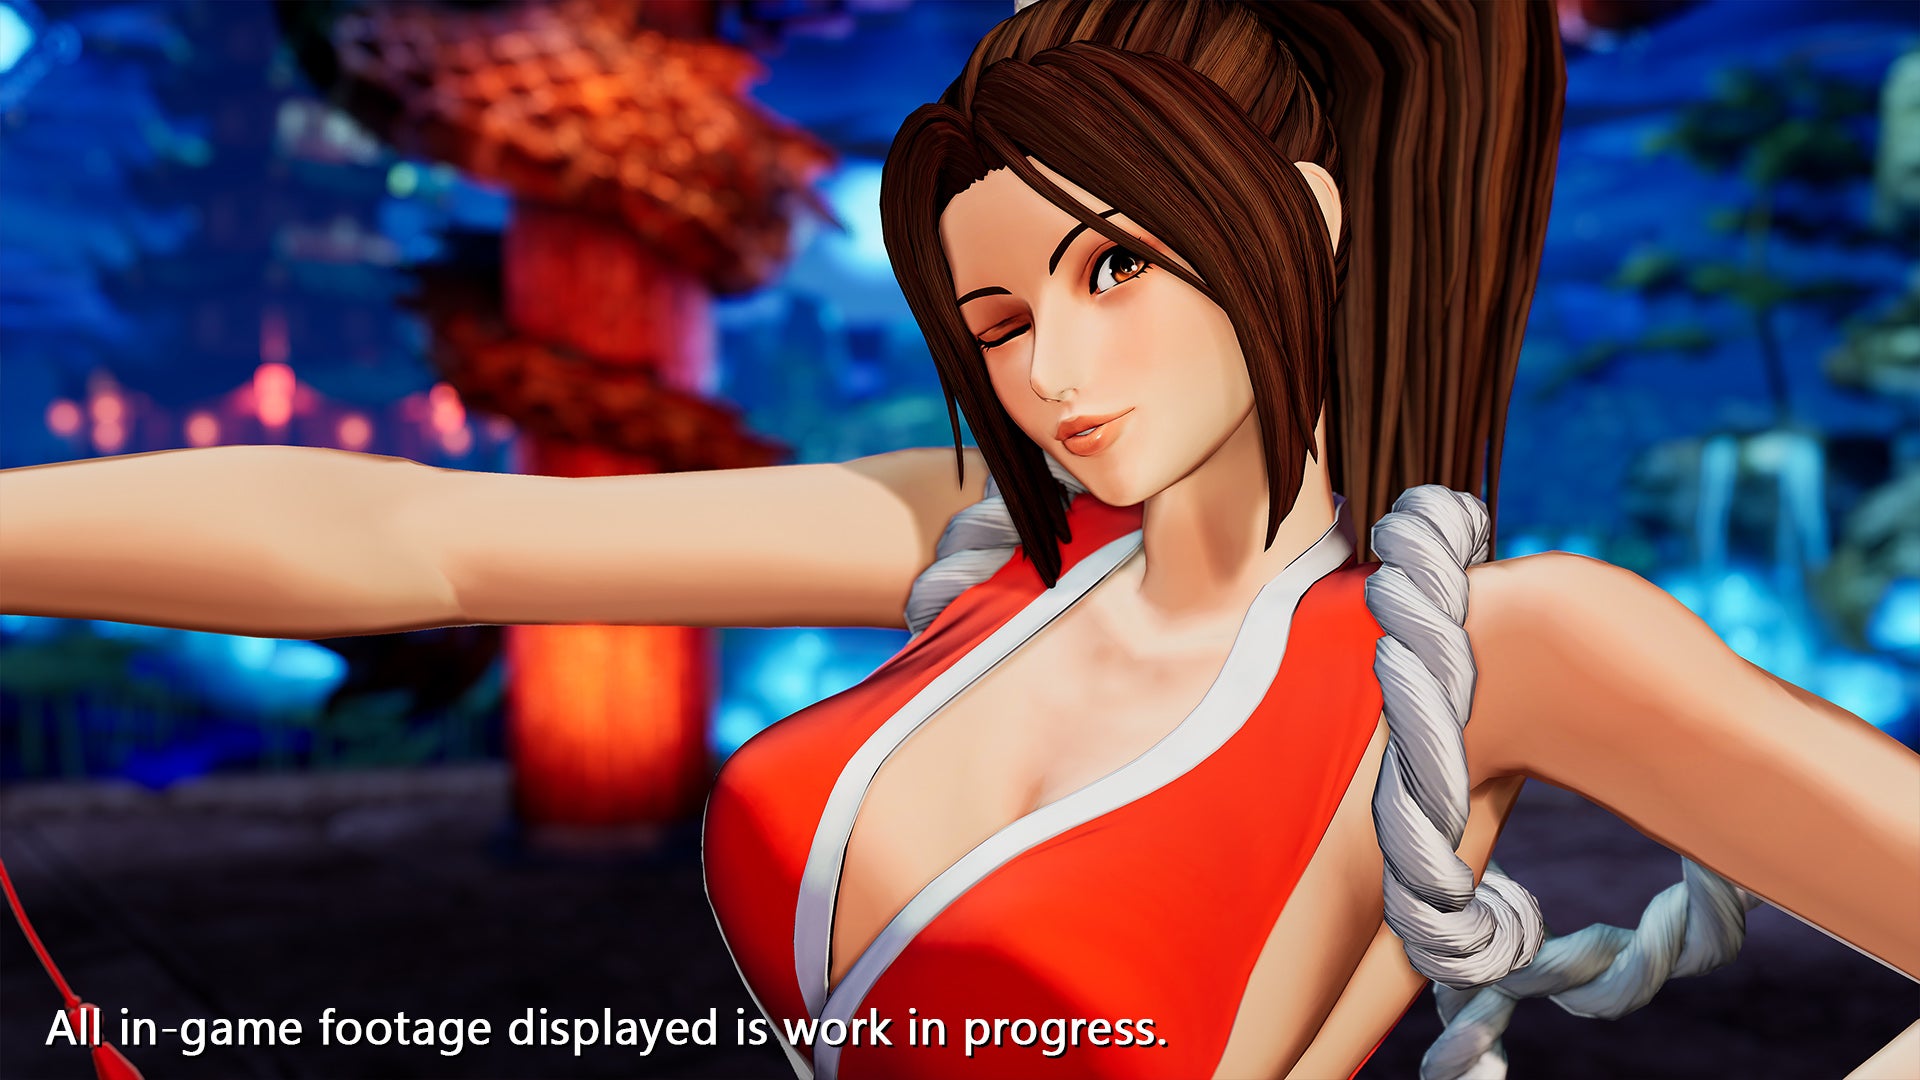 The King of Fighters 15 adds Mai Shiranui to the roster with a new trailer.